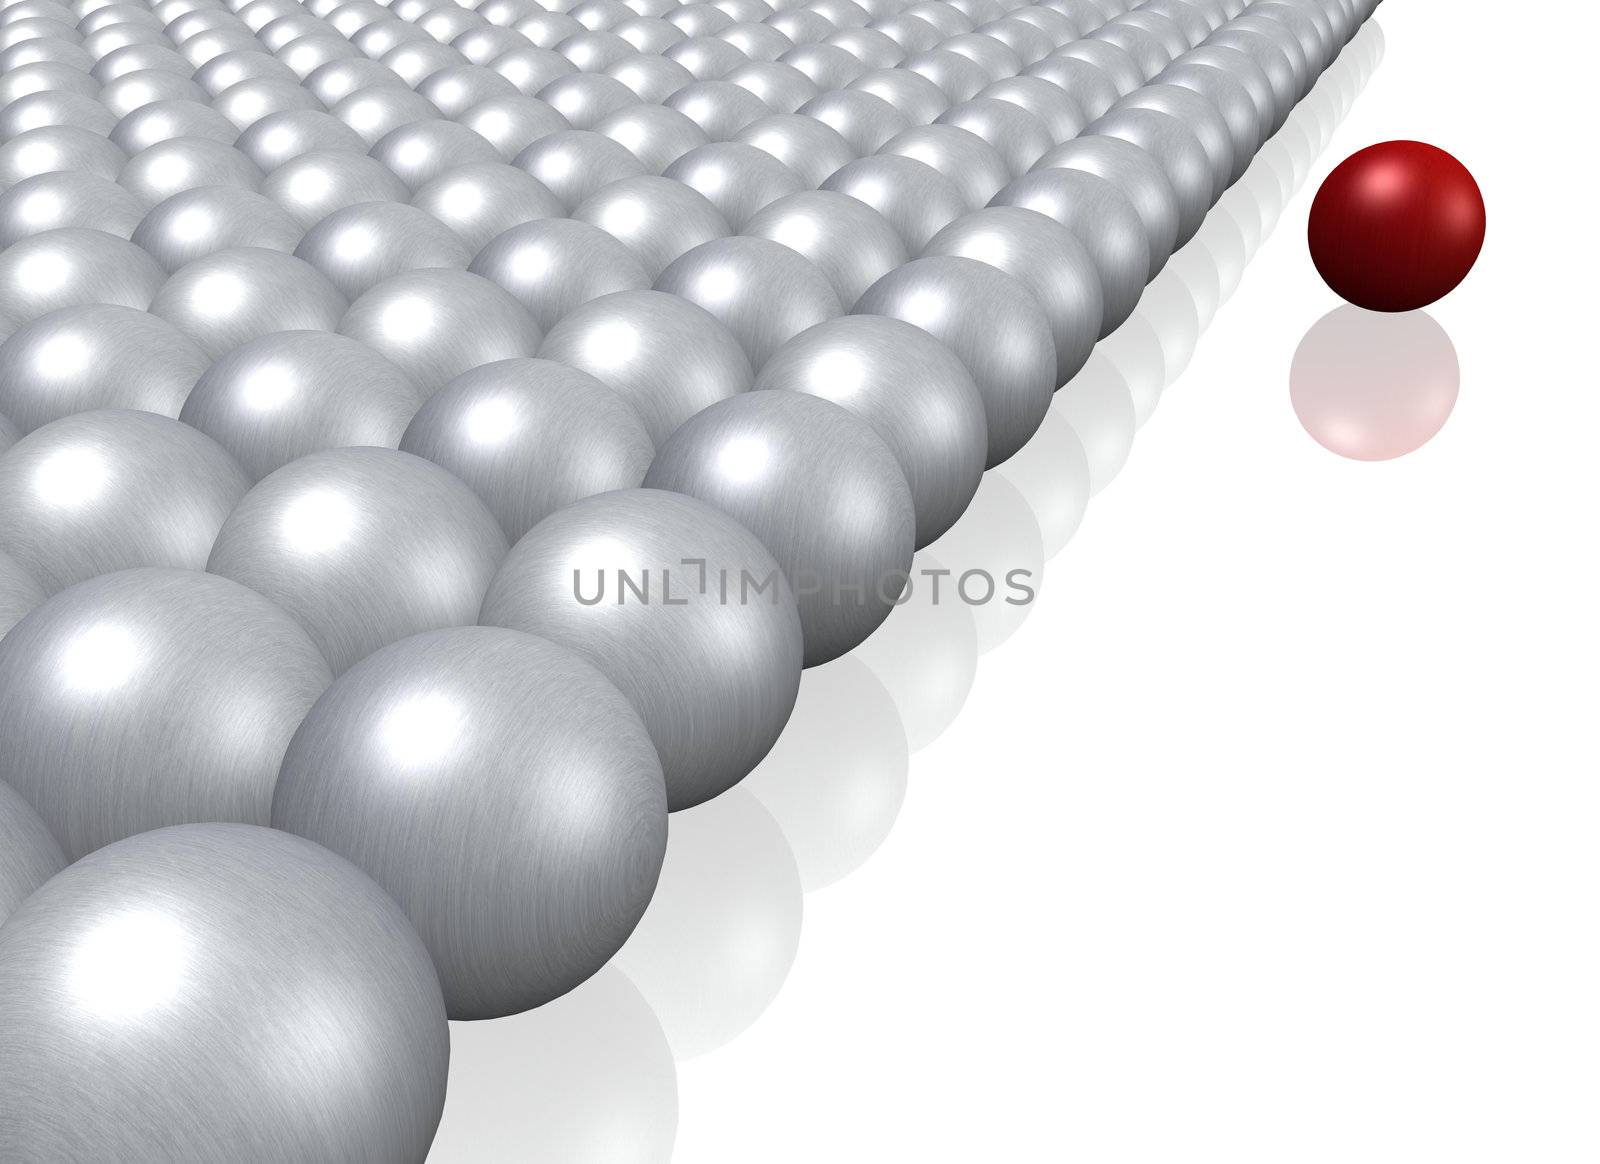 A single red ball lying next to a crowd of grey balls.